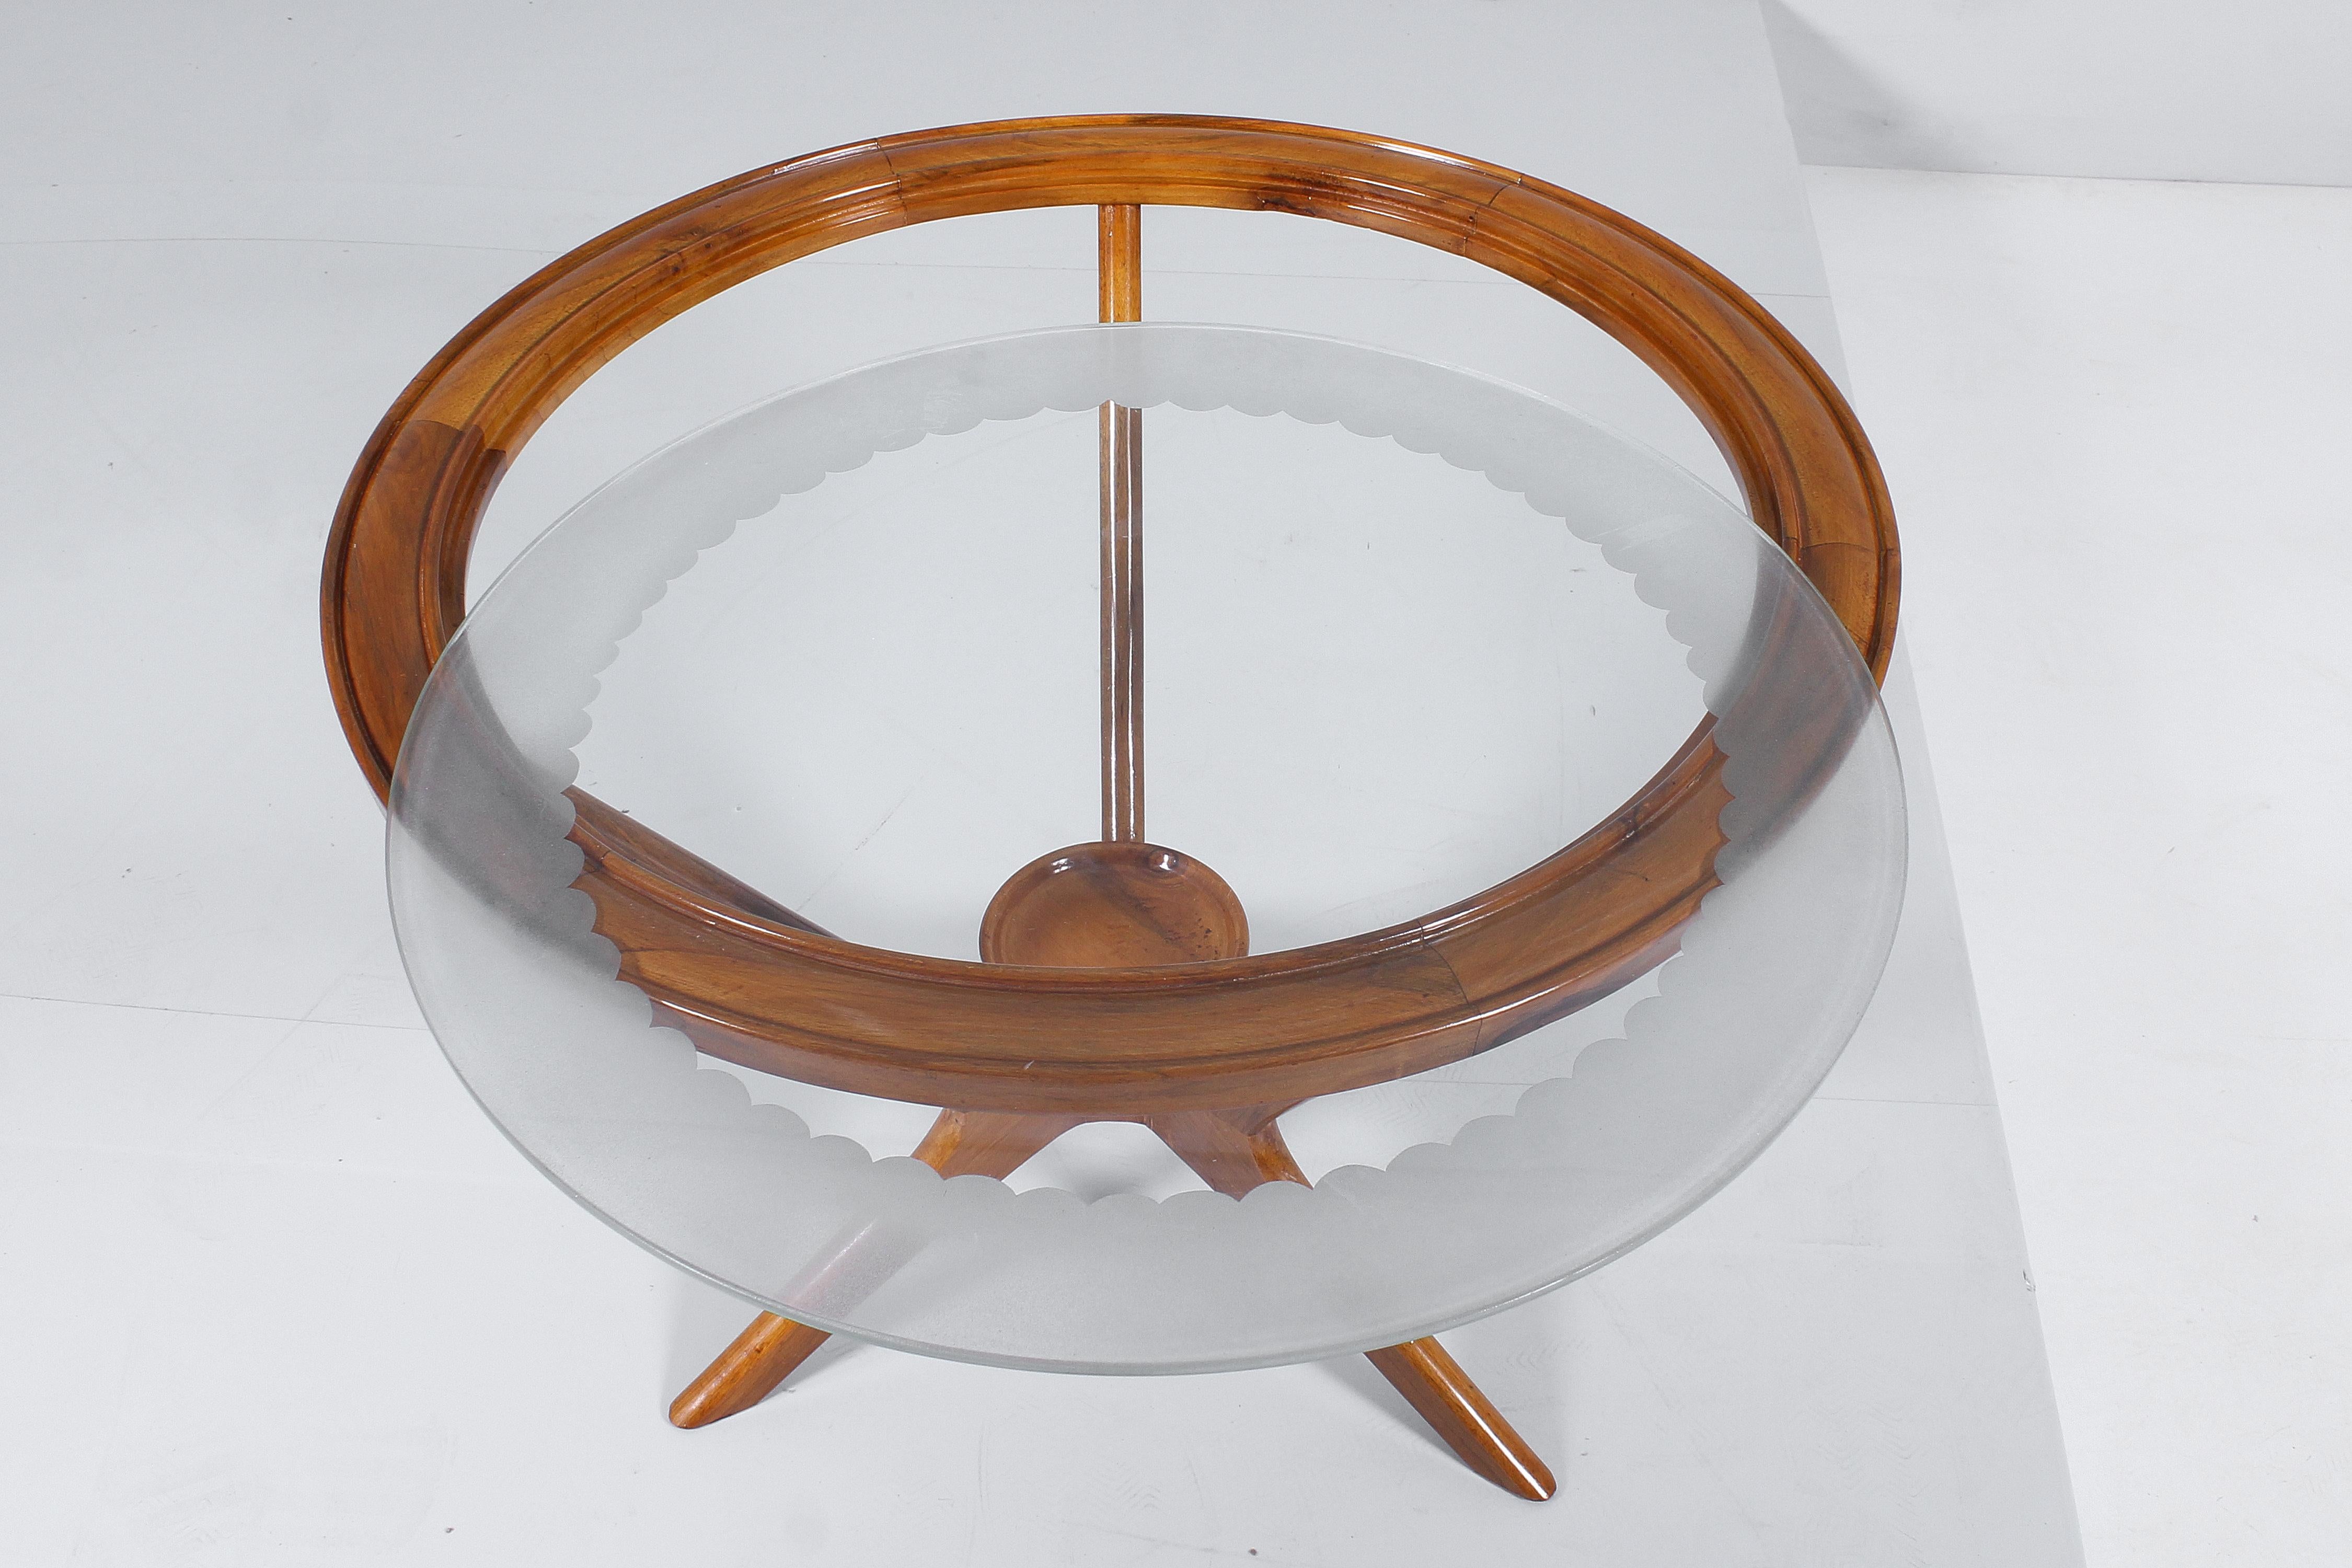 Midcentury Ico Parisi Style Wood and Glass Coffee Table 60s Italy For Sale 1